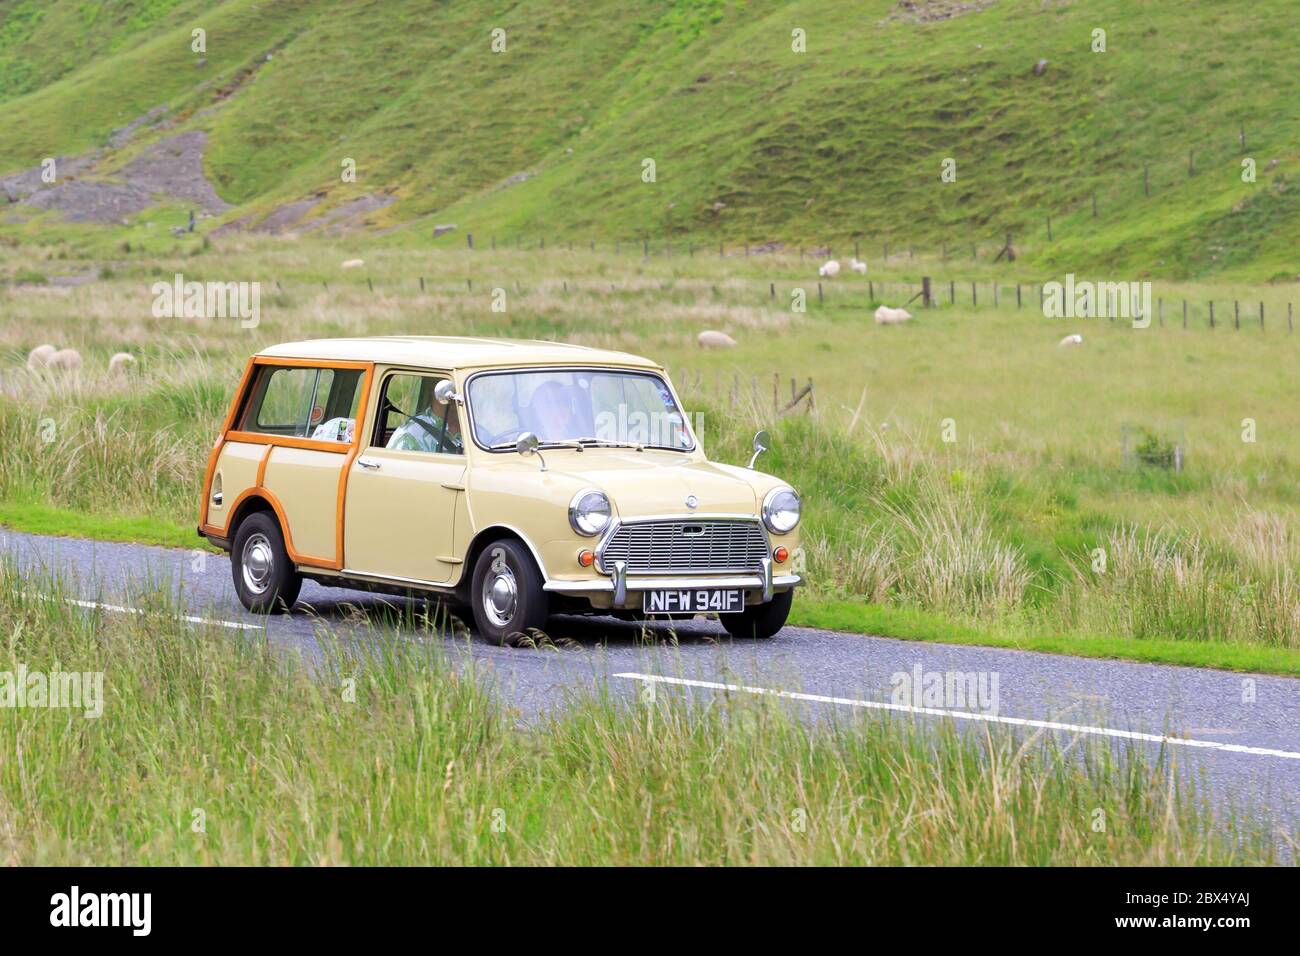 MOFFAT, SCOTLAND - JUNE 29, 2019: 1967 Austin Mini Countryman car in a classic car rally en route towards the town of Moffat, Dumfries and Galloway Stock Photo